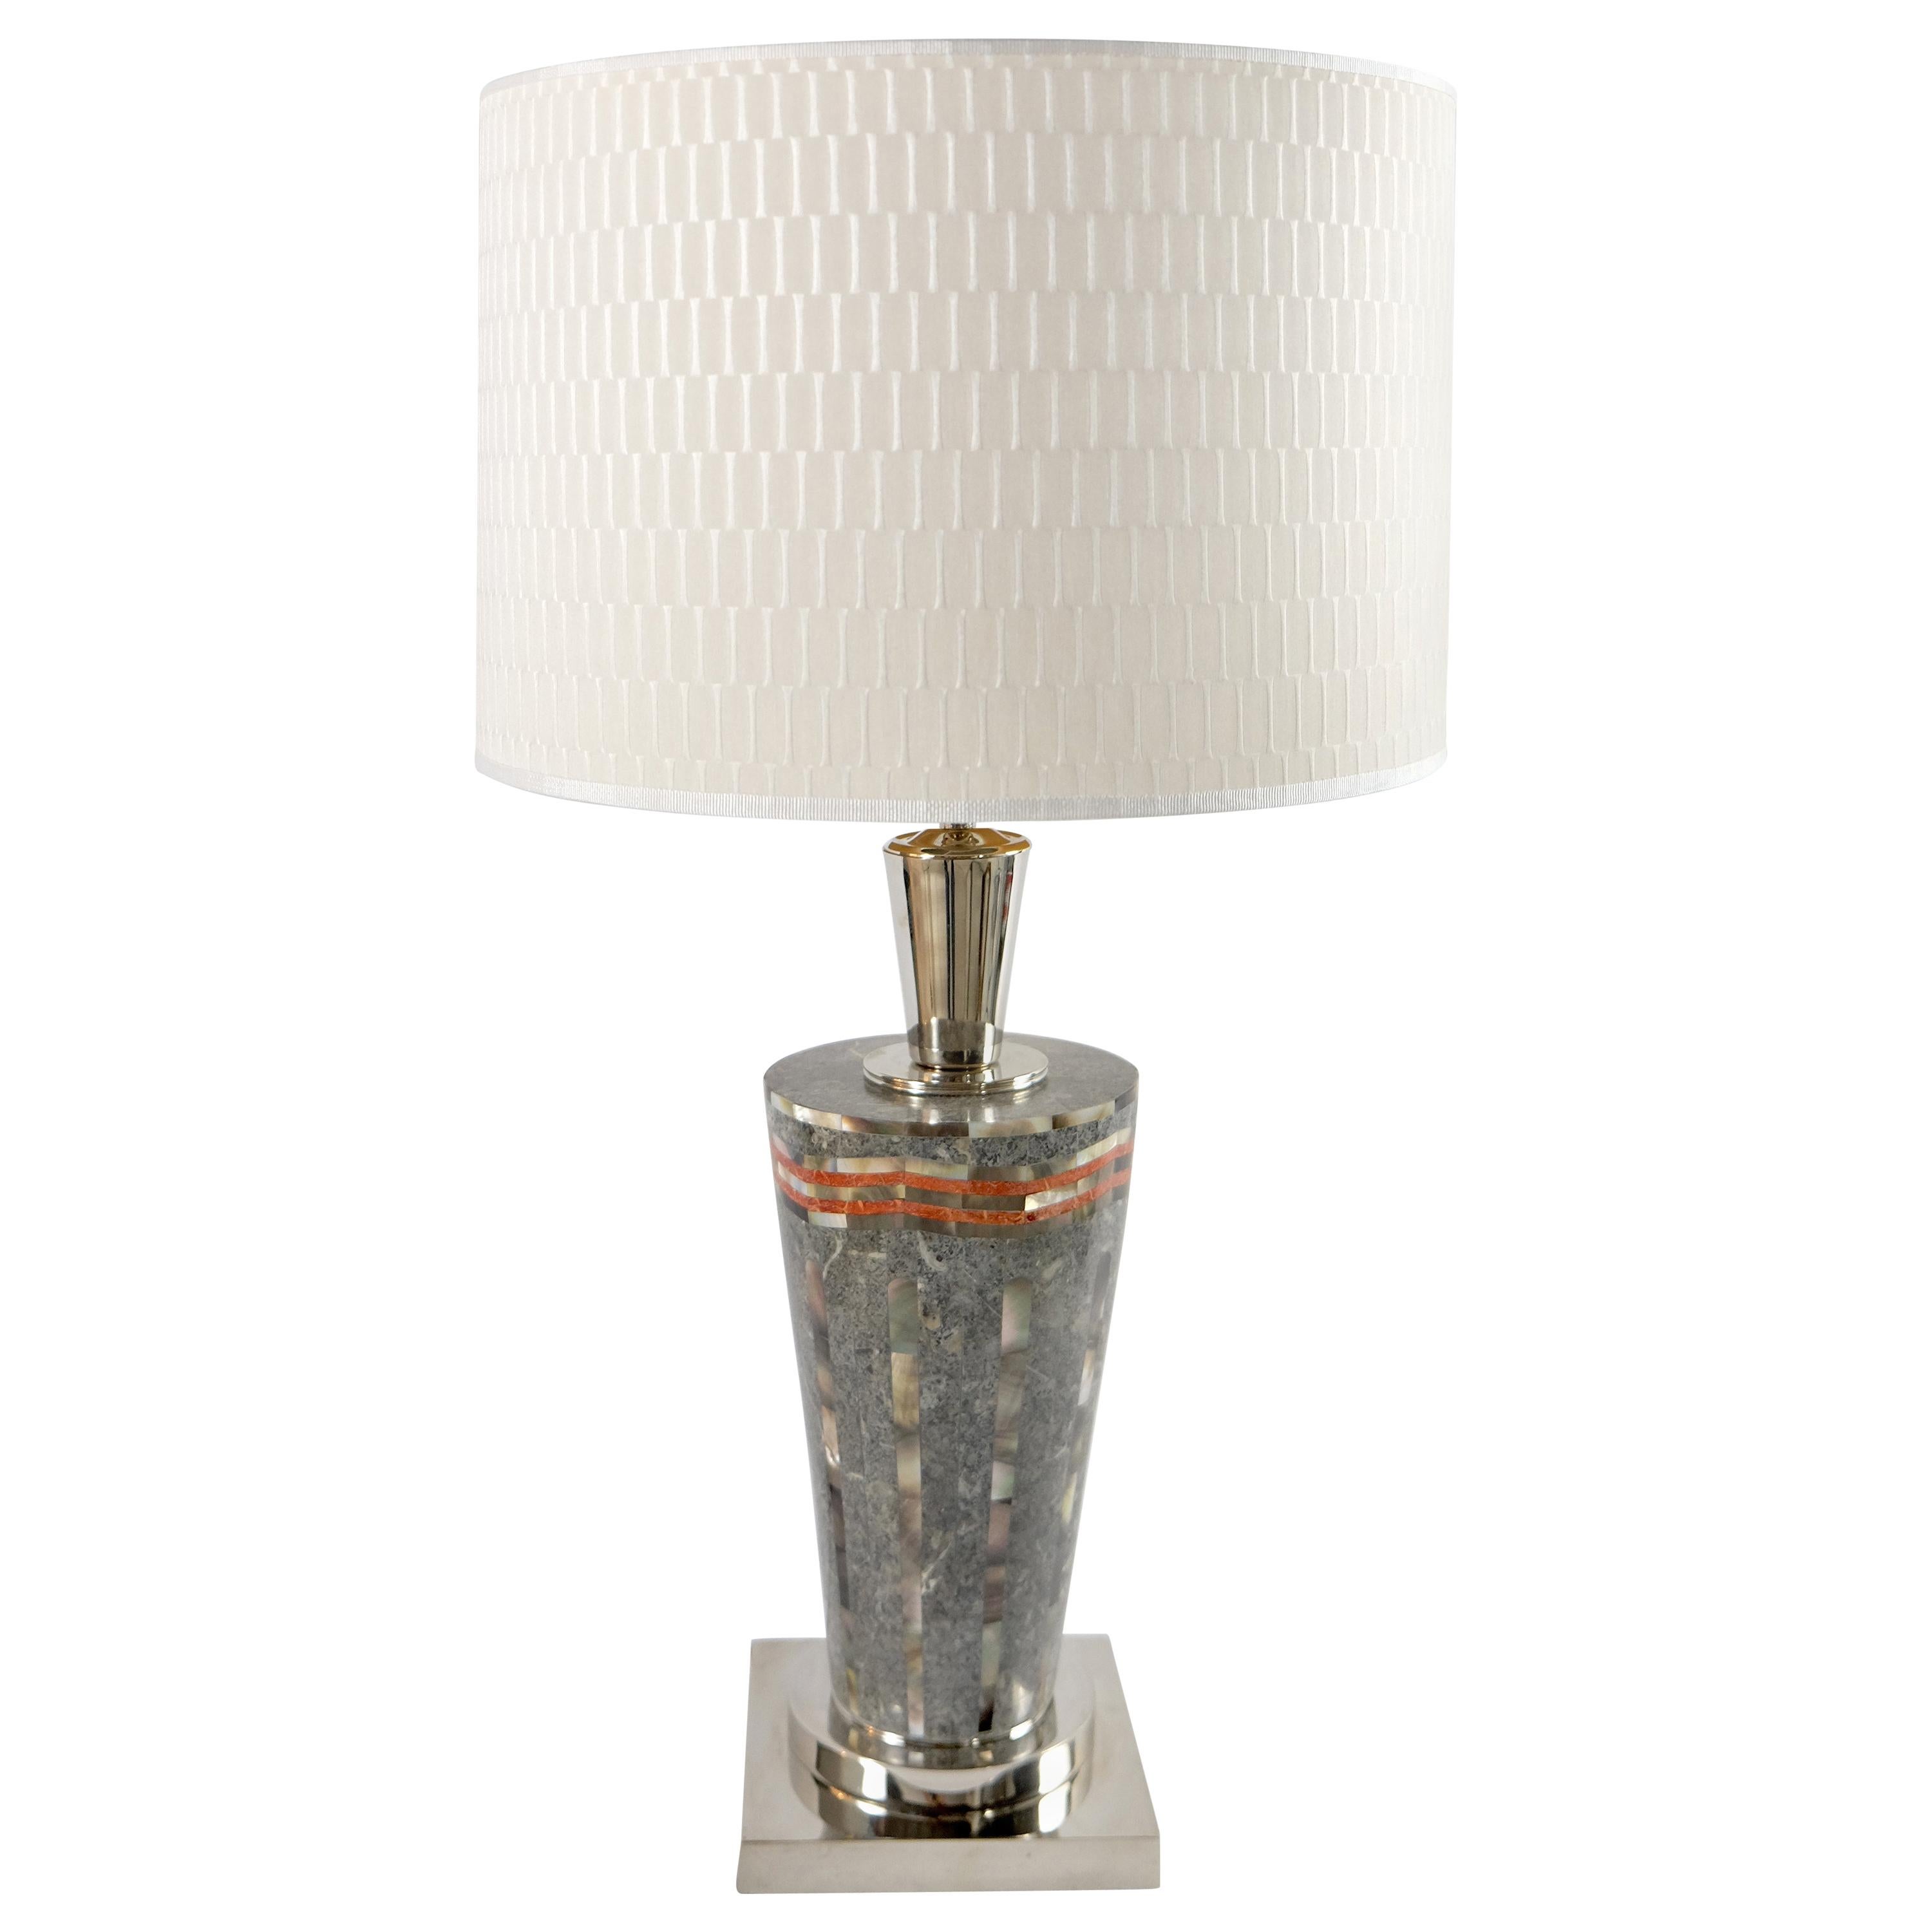 Laudarte Srl of Italy Table Lamp in Marble and Mother-Of Pearl 

Offered for sale is the Sintex Table Lamp with a sleek mosaic body of Mother-of-Pearl and stones from Ludarte Srl of Italy. The lamps are listed individually with a pair being